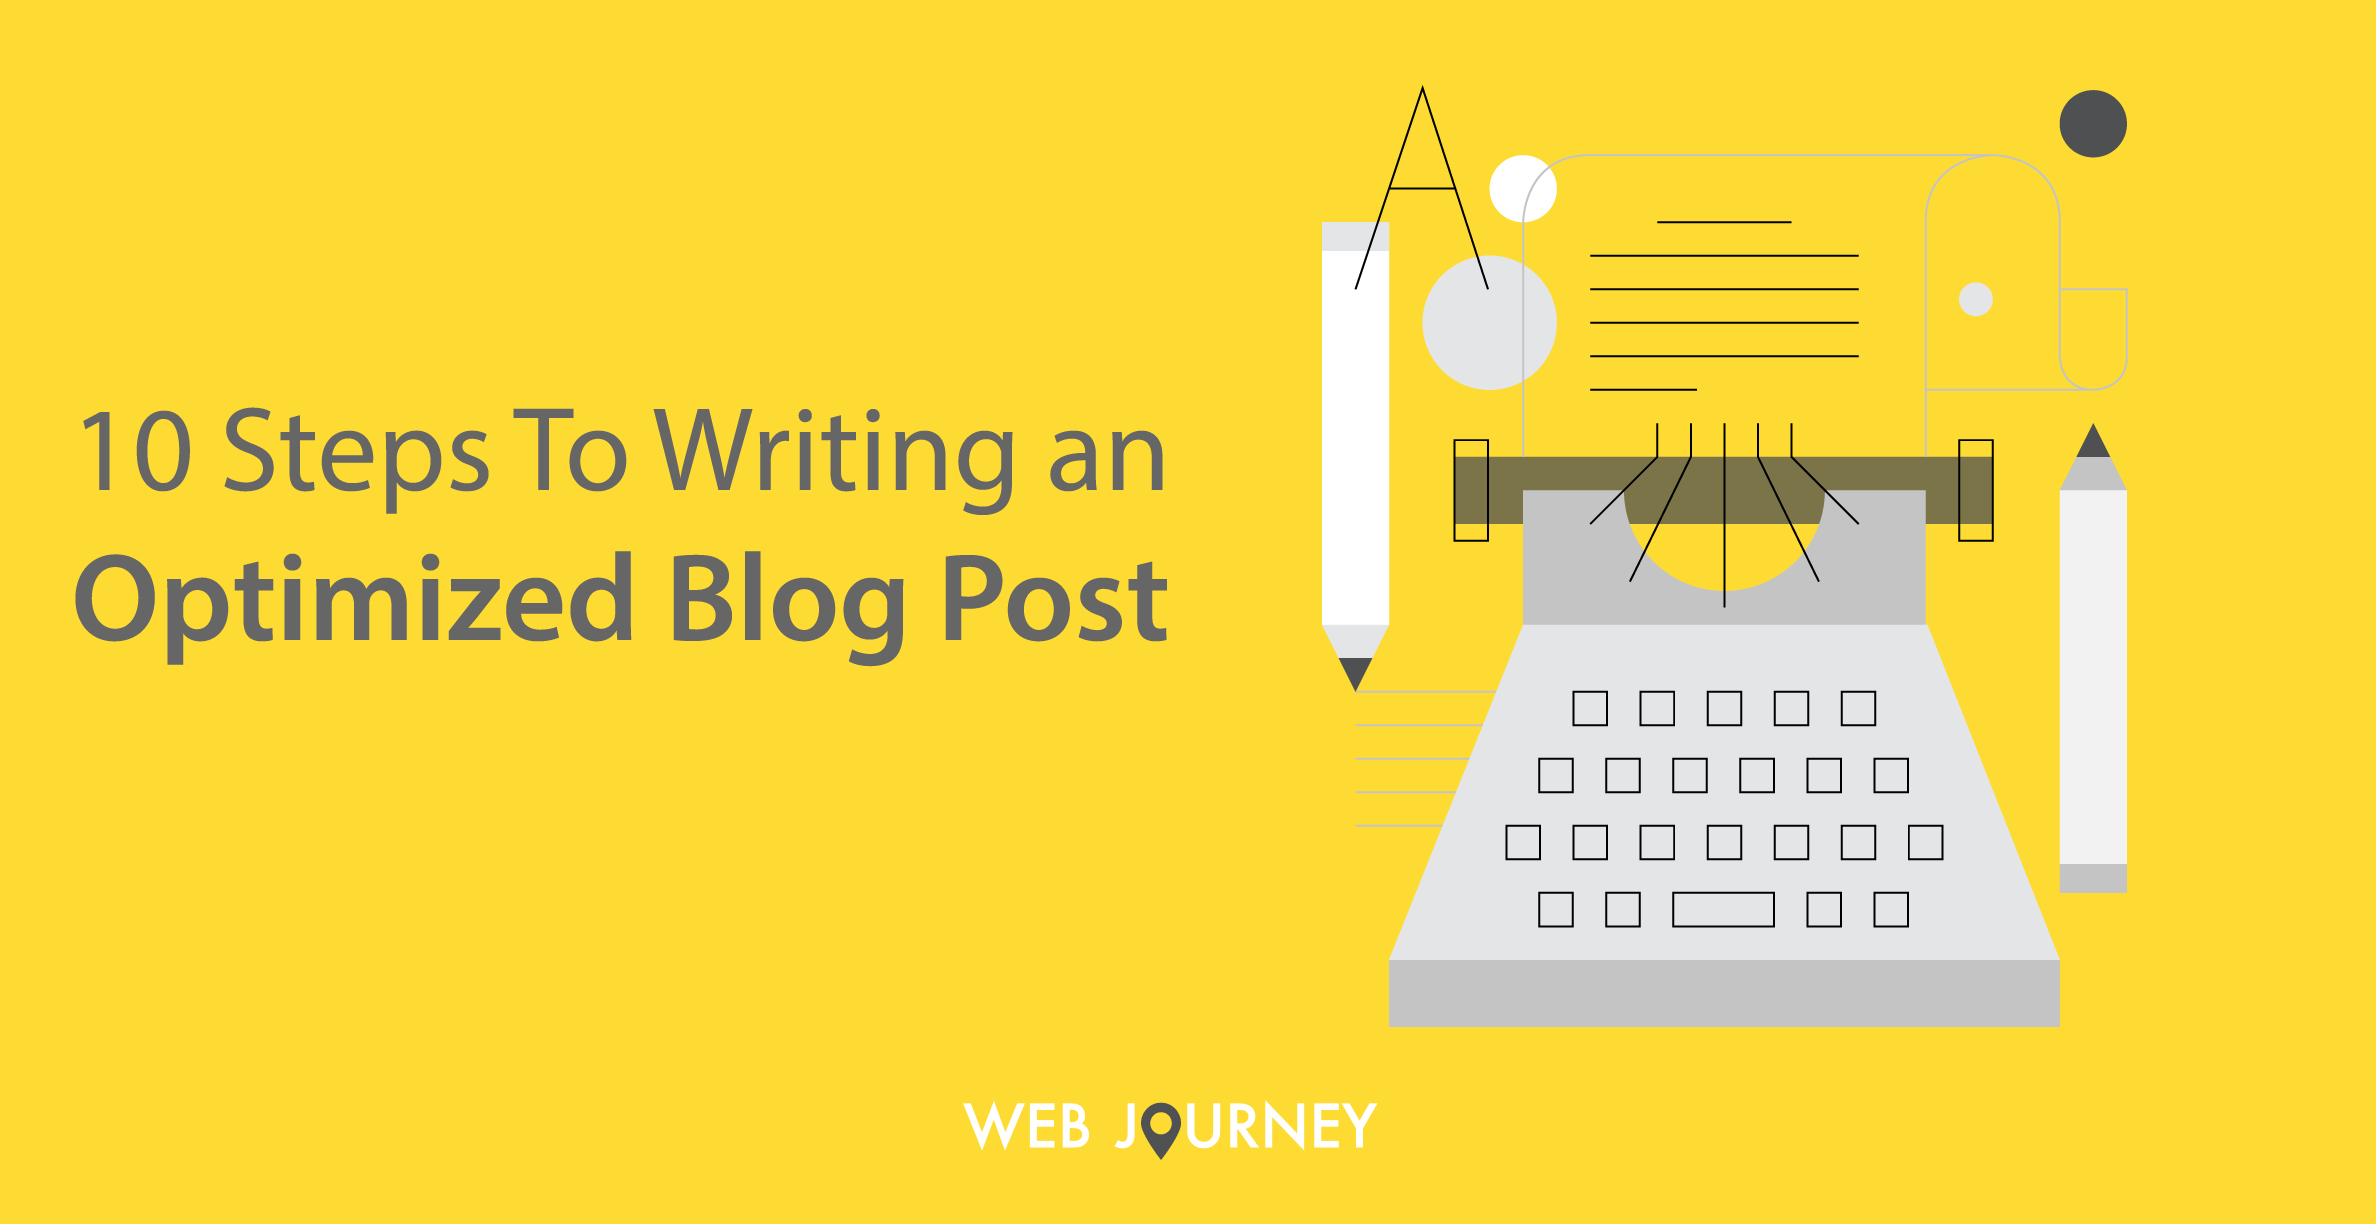 10 Steps to Writing an Optimized Blog Post